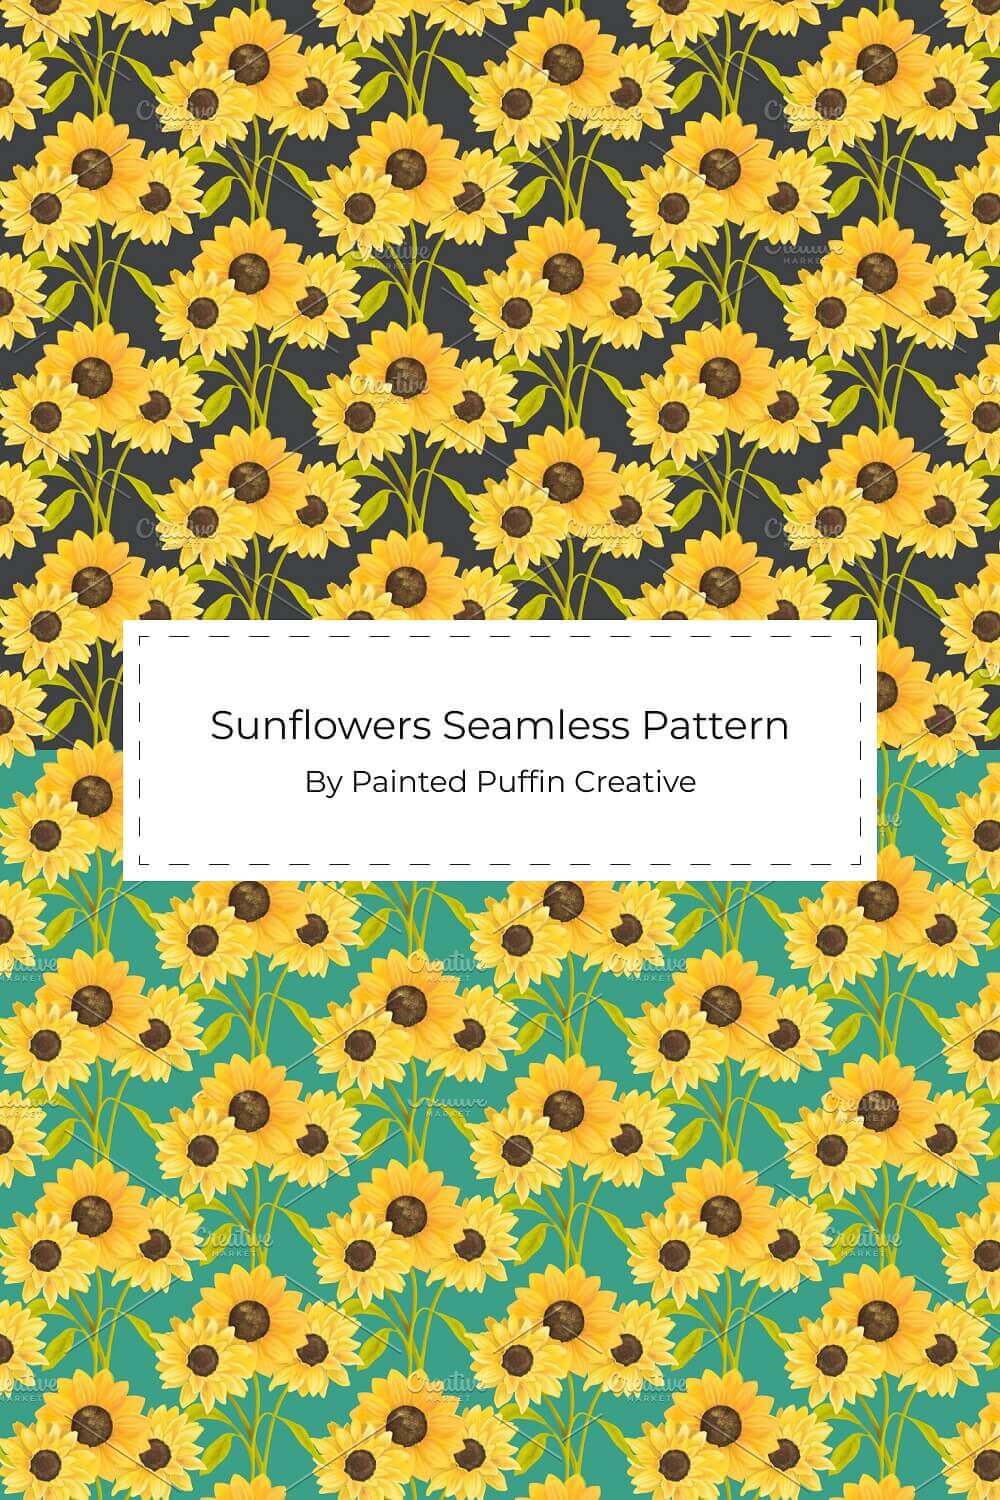 Two parallel horizontal images with small sunflowers.